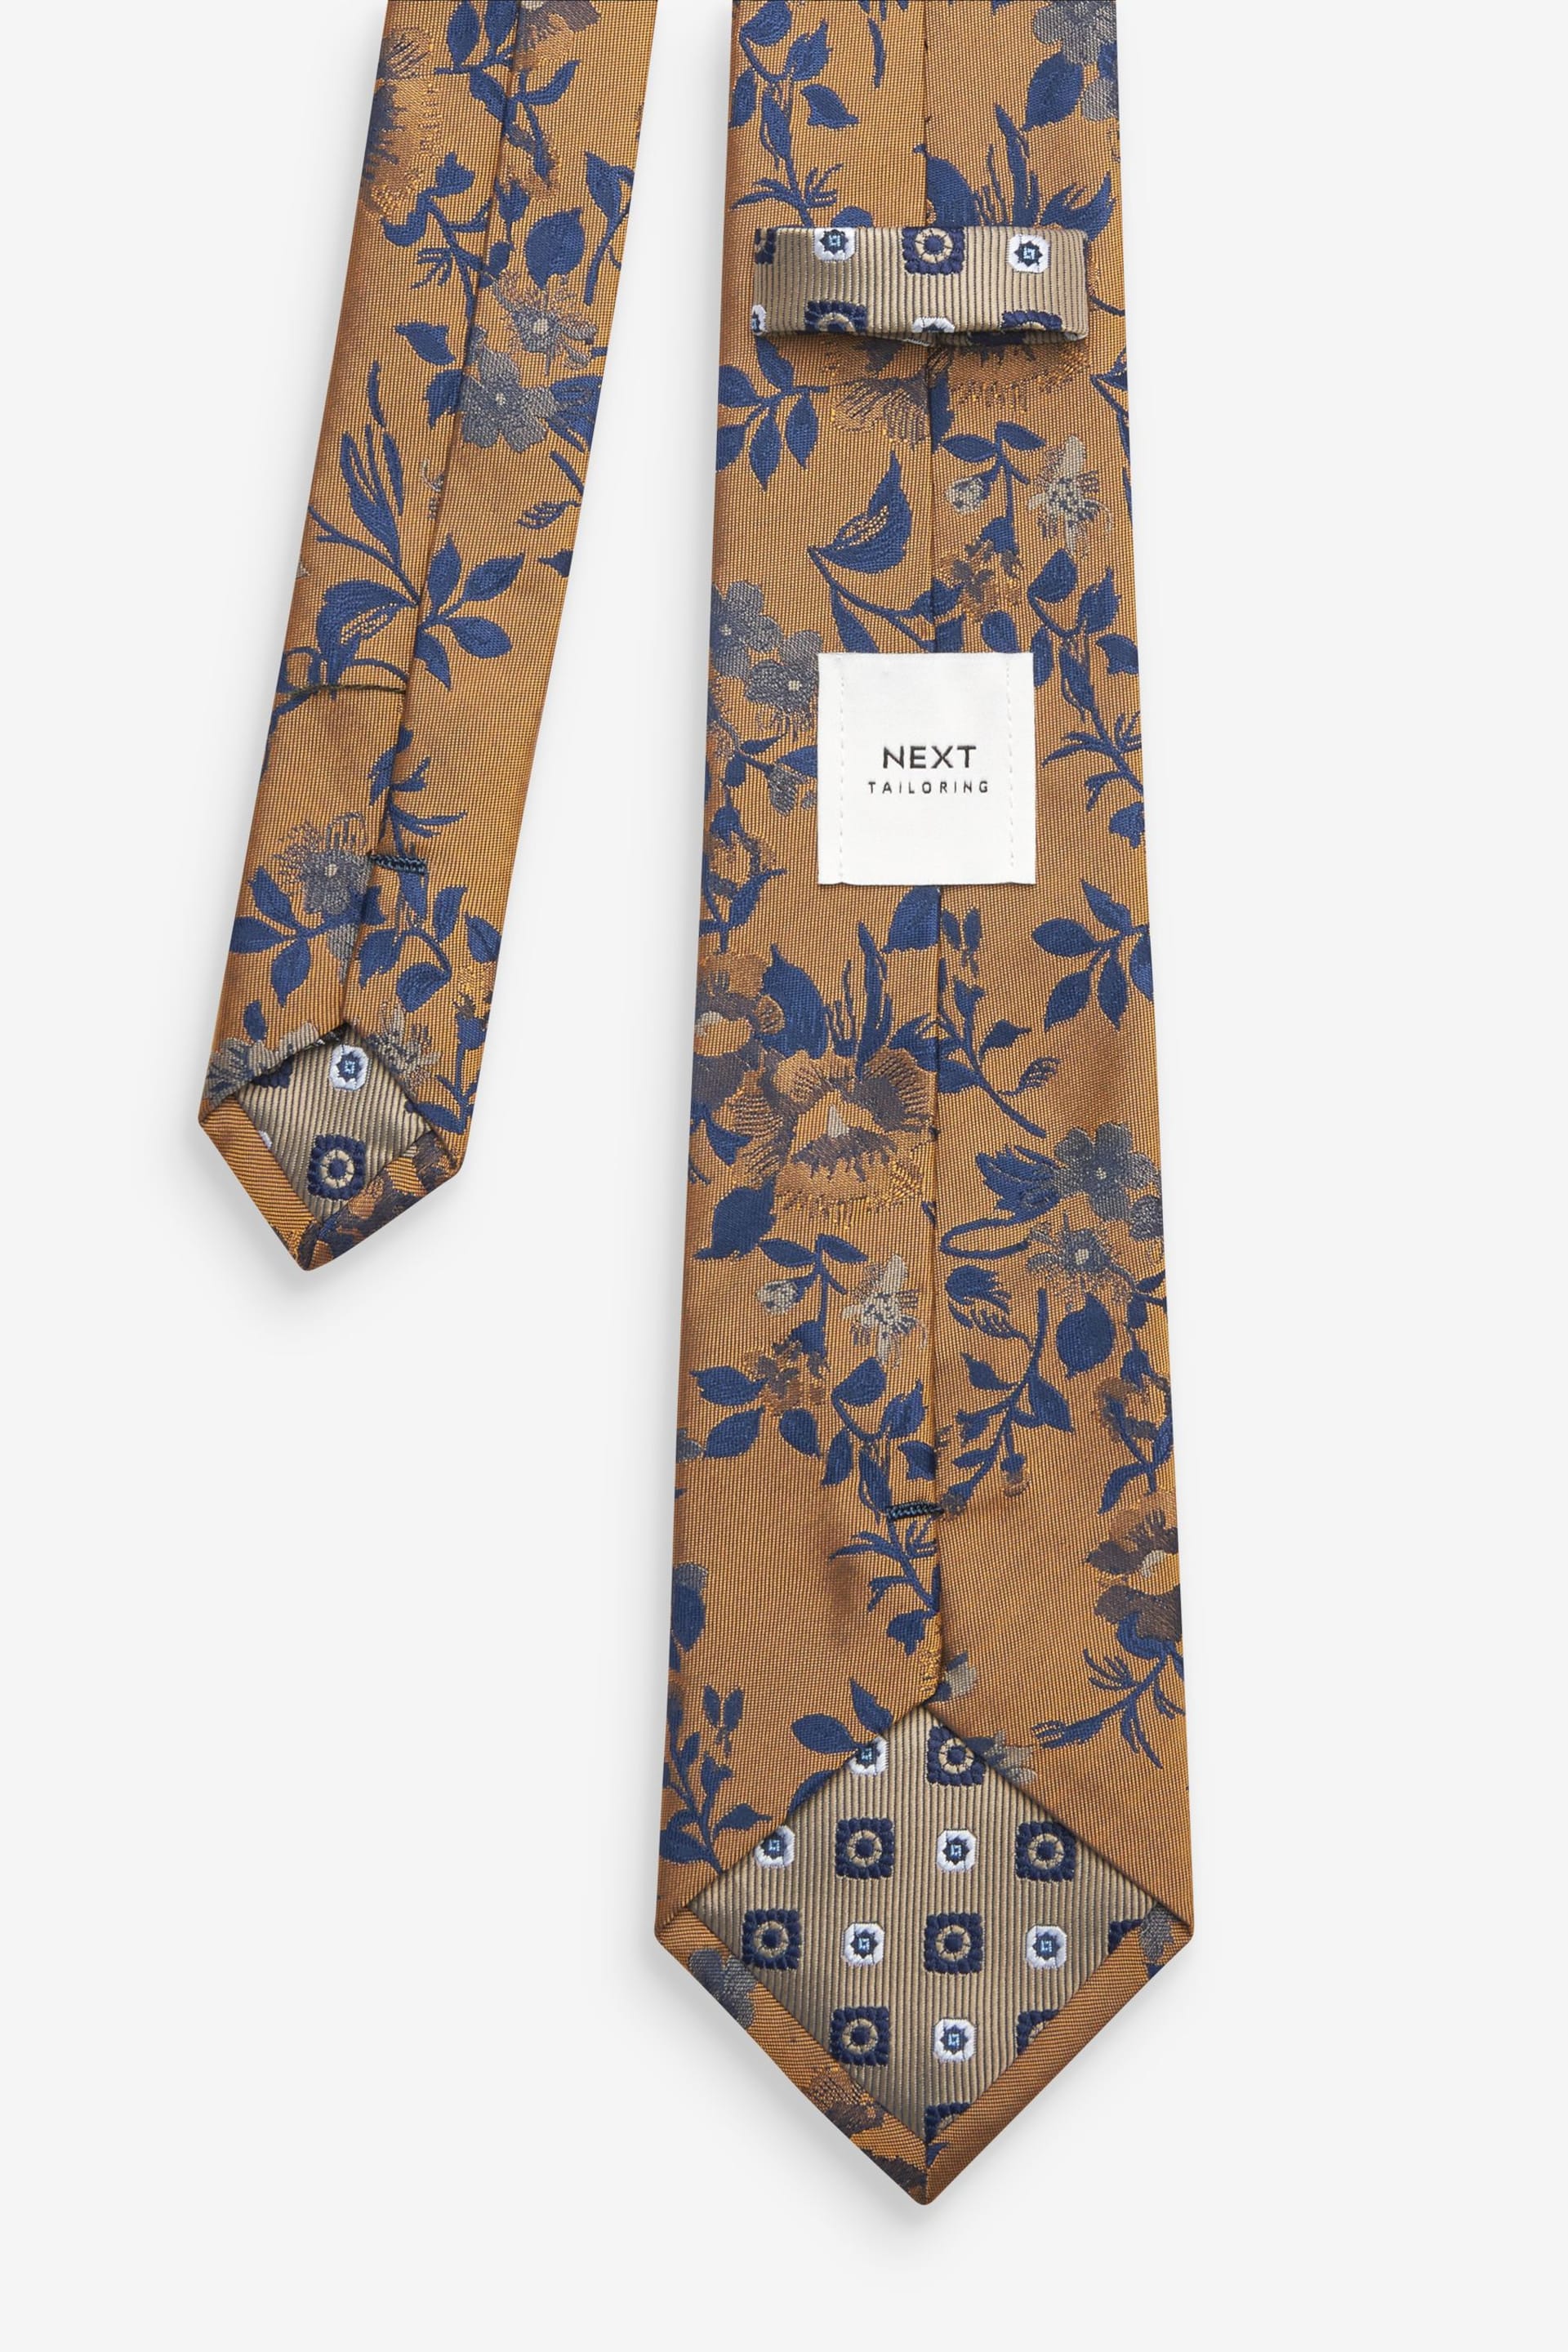 Yellow Gold/Blue Navy Floral Pattern Tie - Image 3 of 3